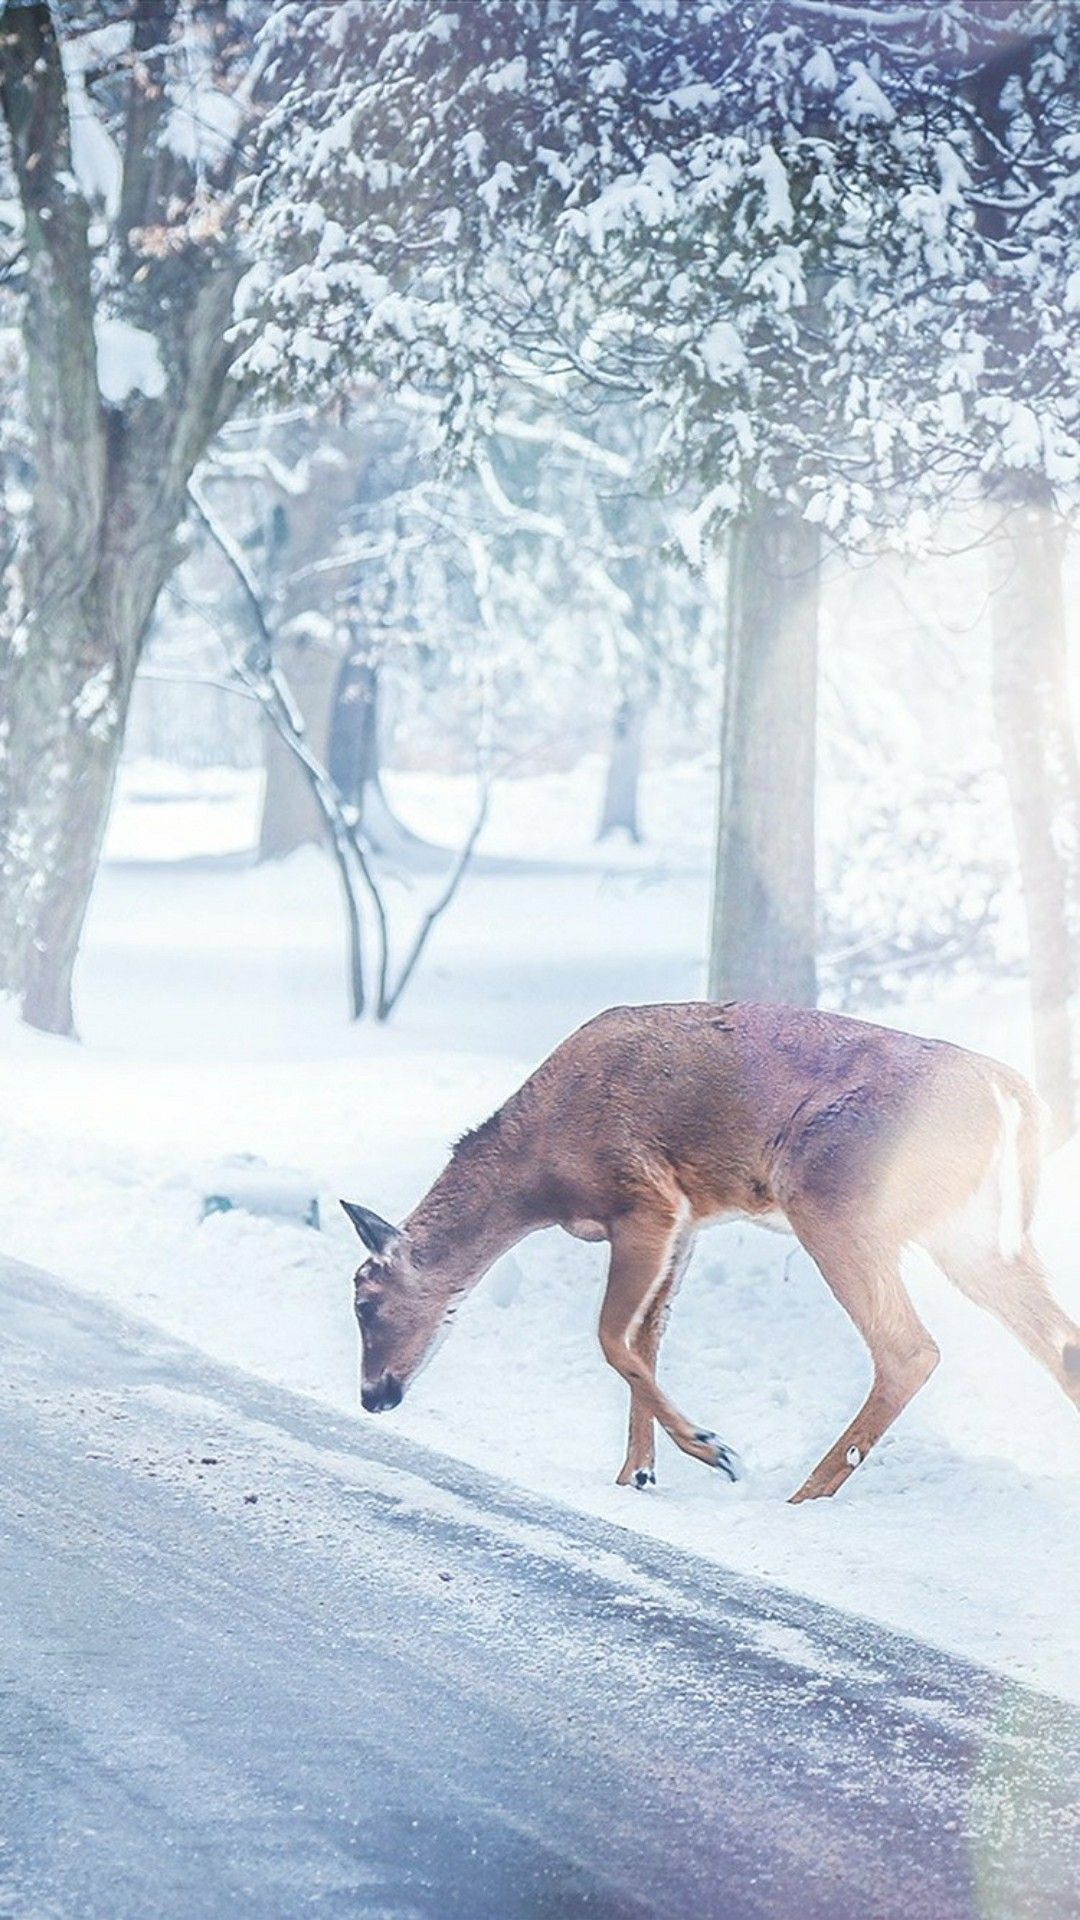 1080x1920 Deer in snow by a road | Nature animals, Animals, Winter nature